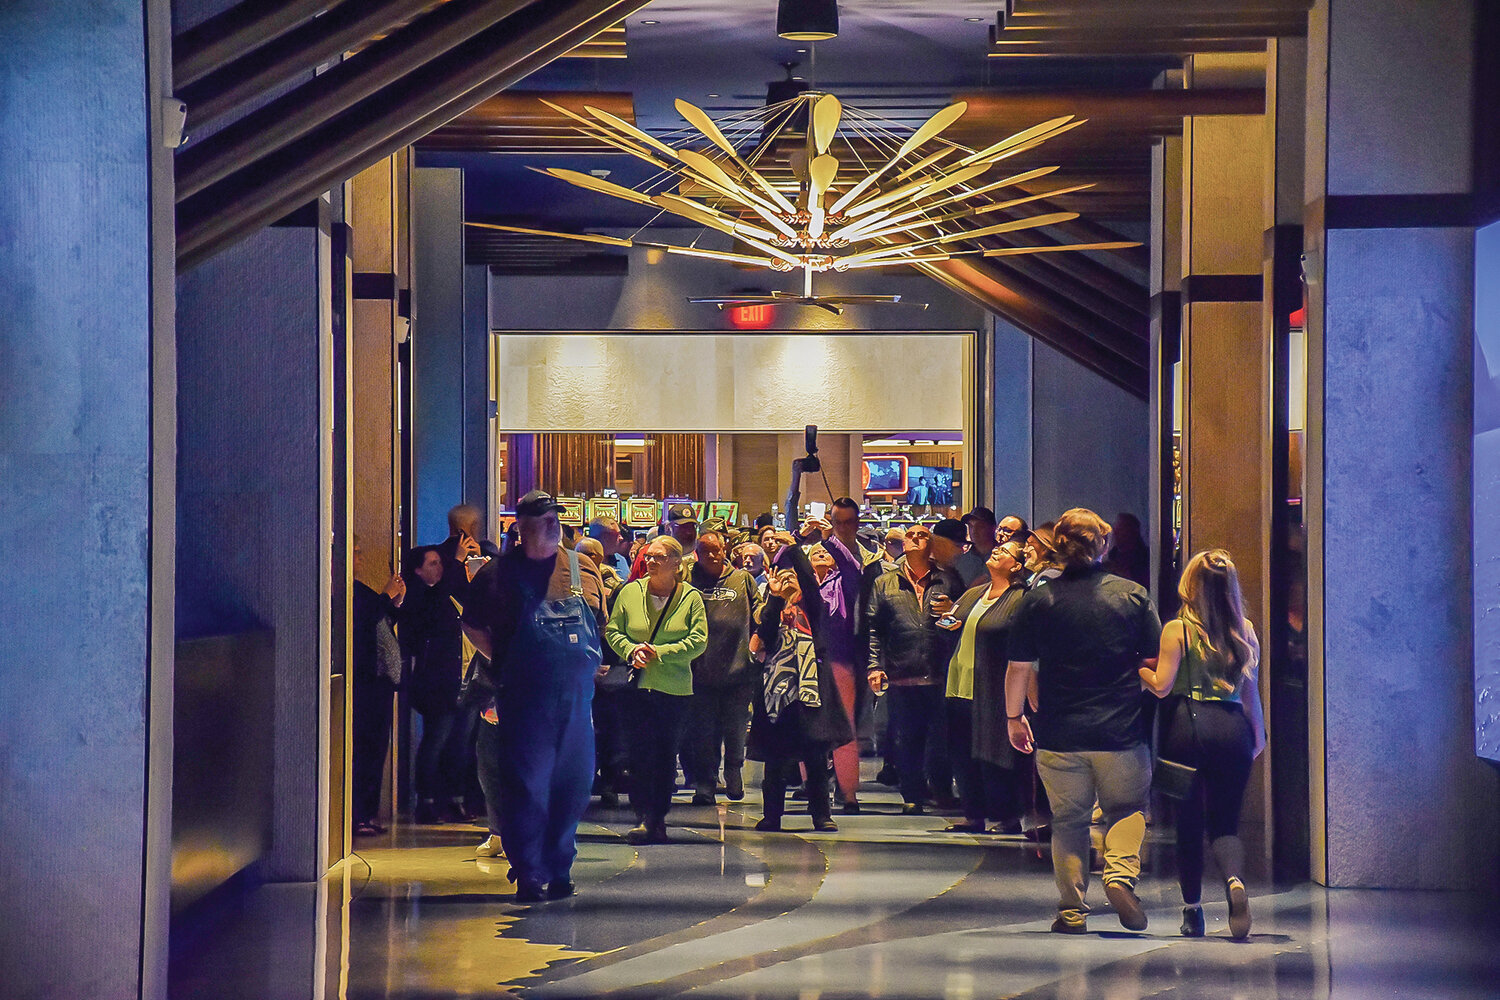 Attendees of a grand opening event for the new hotel at ilani walk through the corridor connecting the building with the rest of the casino resort following a ribbon-cutting ceremony on April 24.